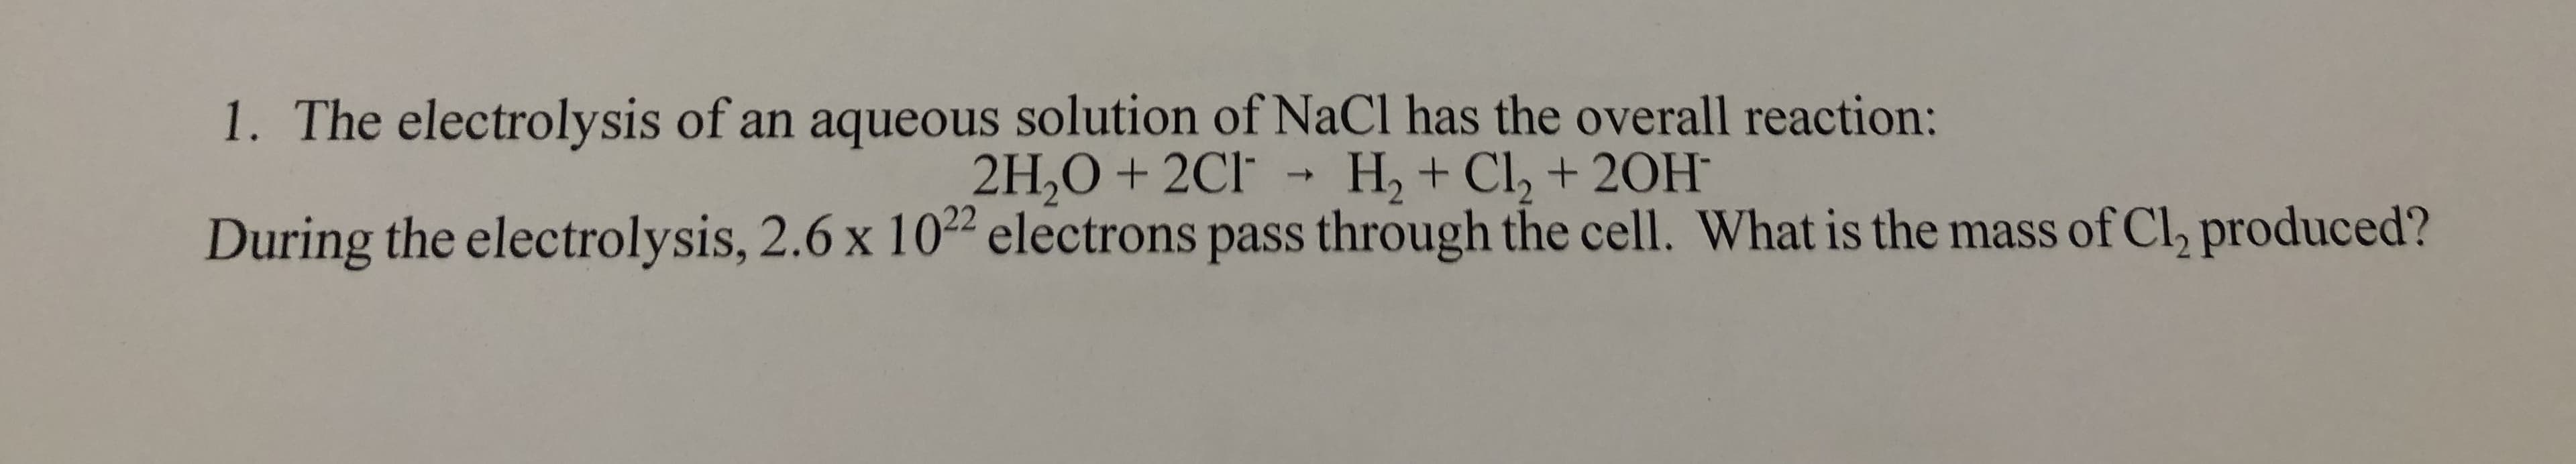 1. The electrolysis of an aqueous solution of NaCl has the overall reaction:
2H,O + 2Cl
H, + Cl, + 20H
->
During the electrolysis, 2.6 x 102² electrons pass through the cell. What is the mass of Cl, produced?
